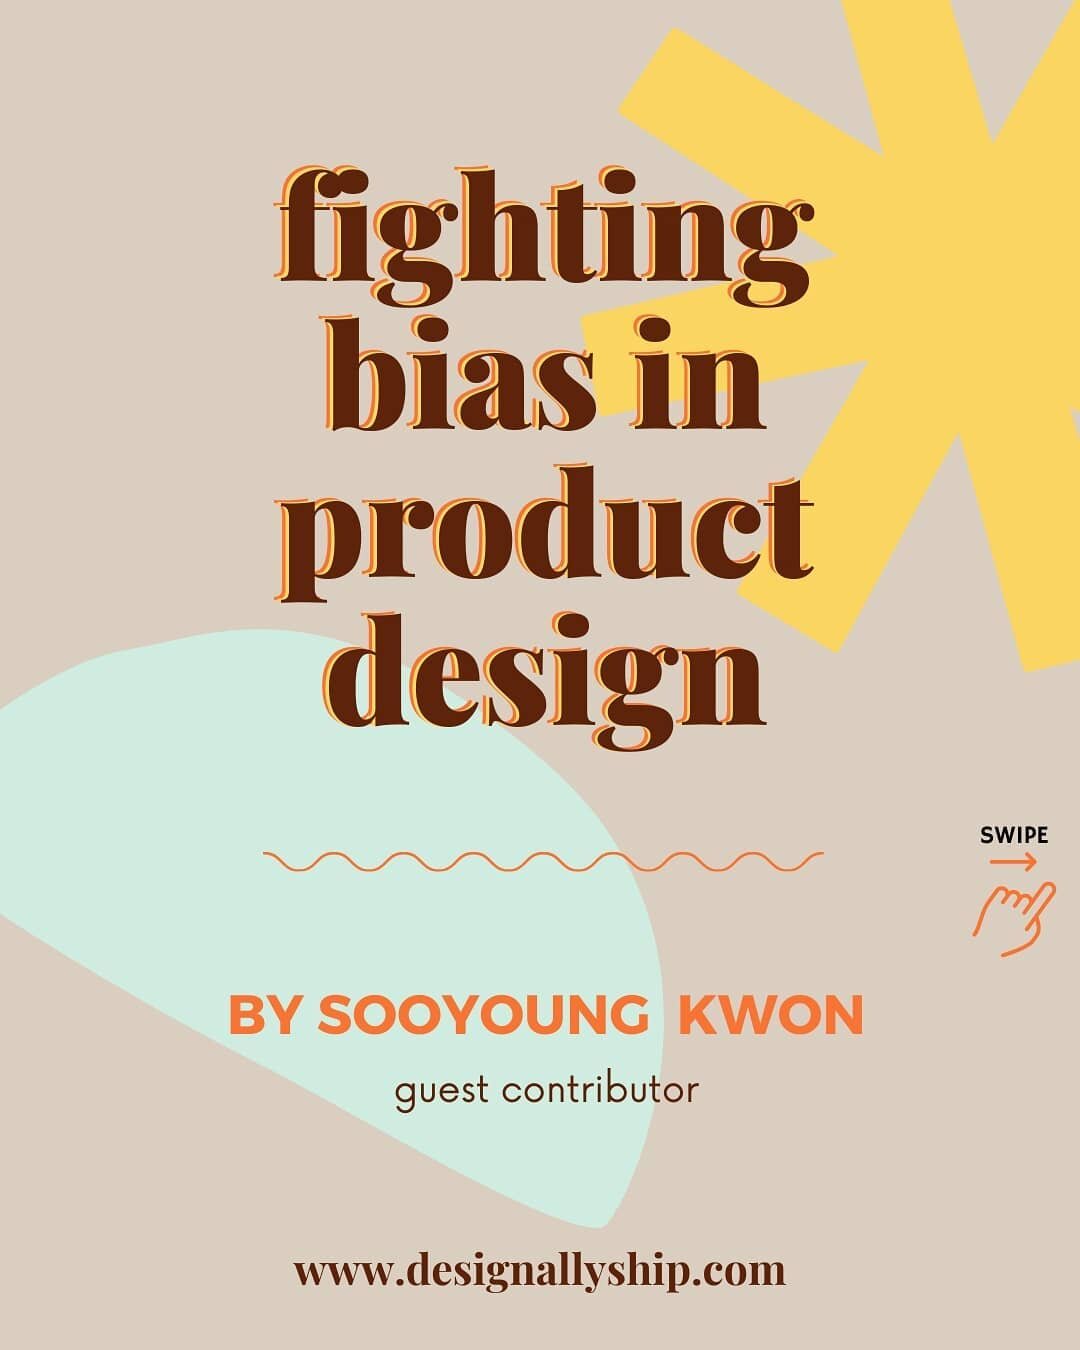 This week, we are partnering with Design Ally SooYoung Kwon @soo_not_sue_designs to share insights on the importance of fighting bias in product design! As designers we have the ability to create a positive impact on the world through our work. Citat